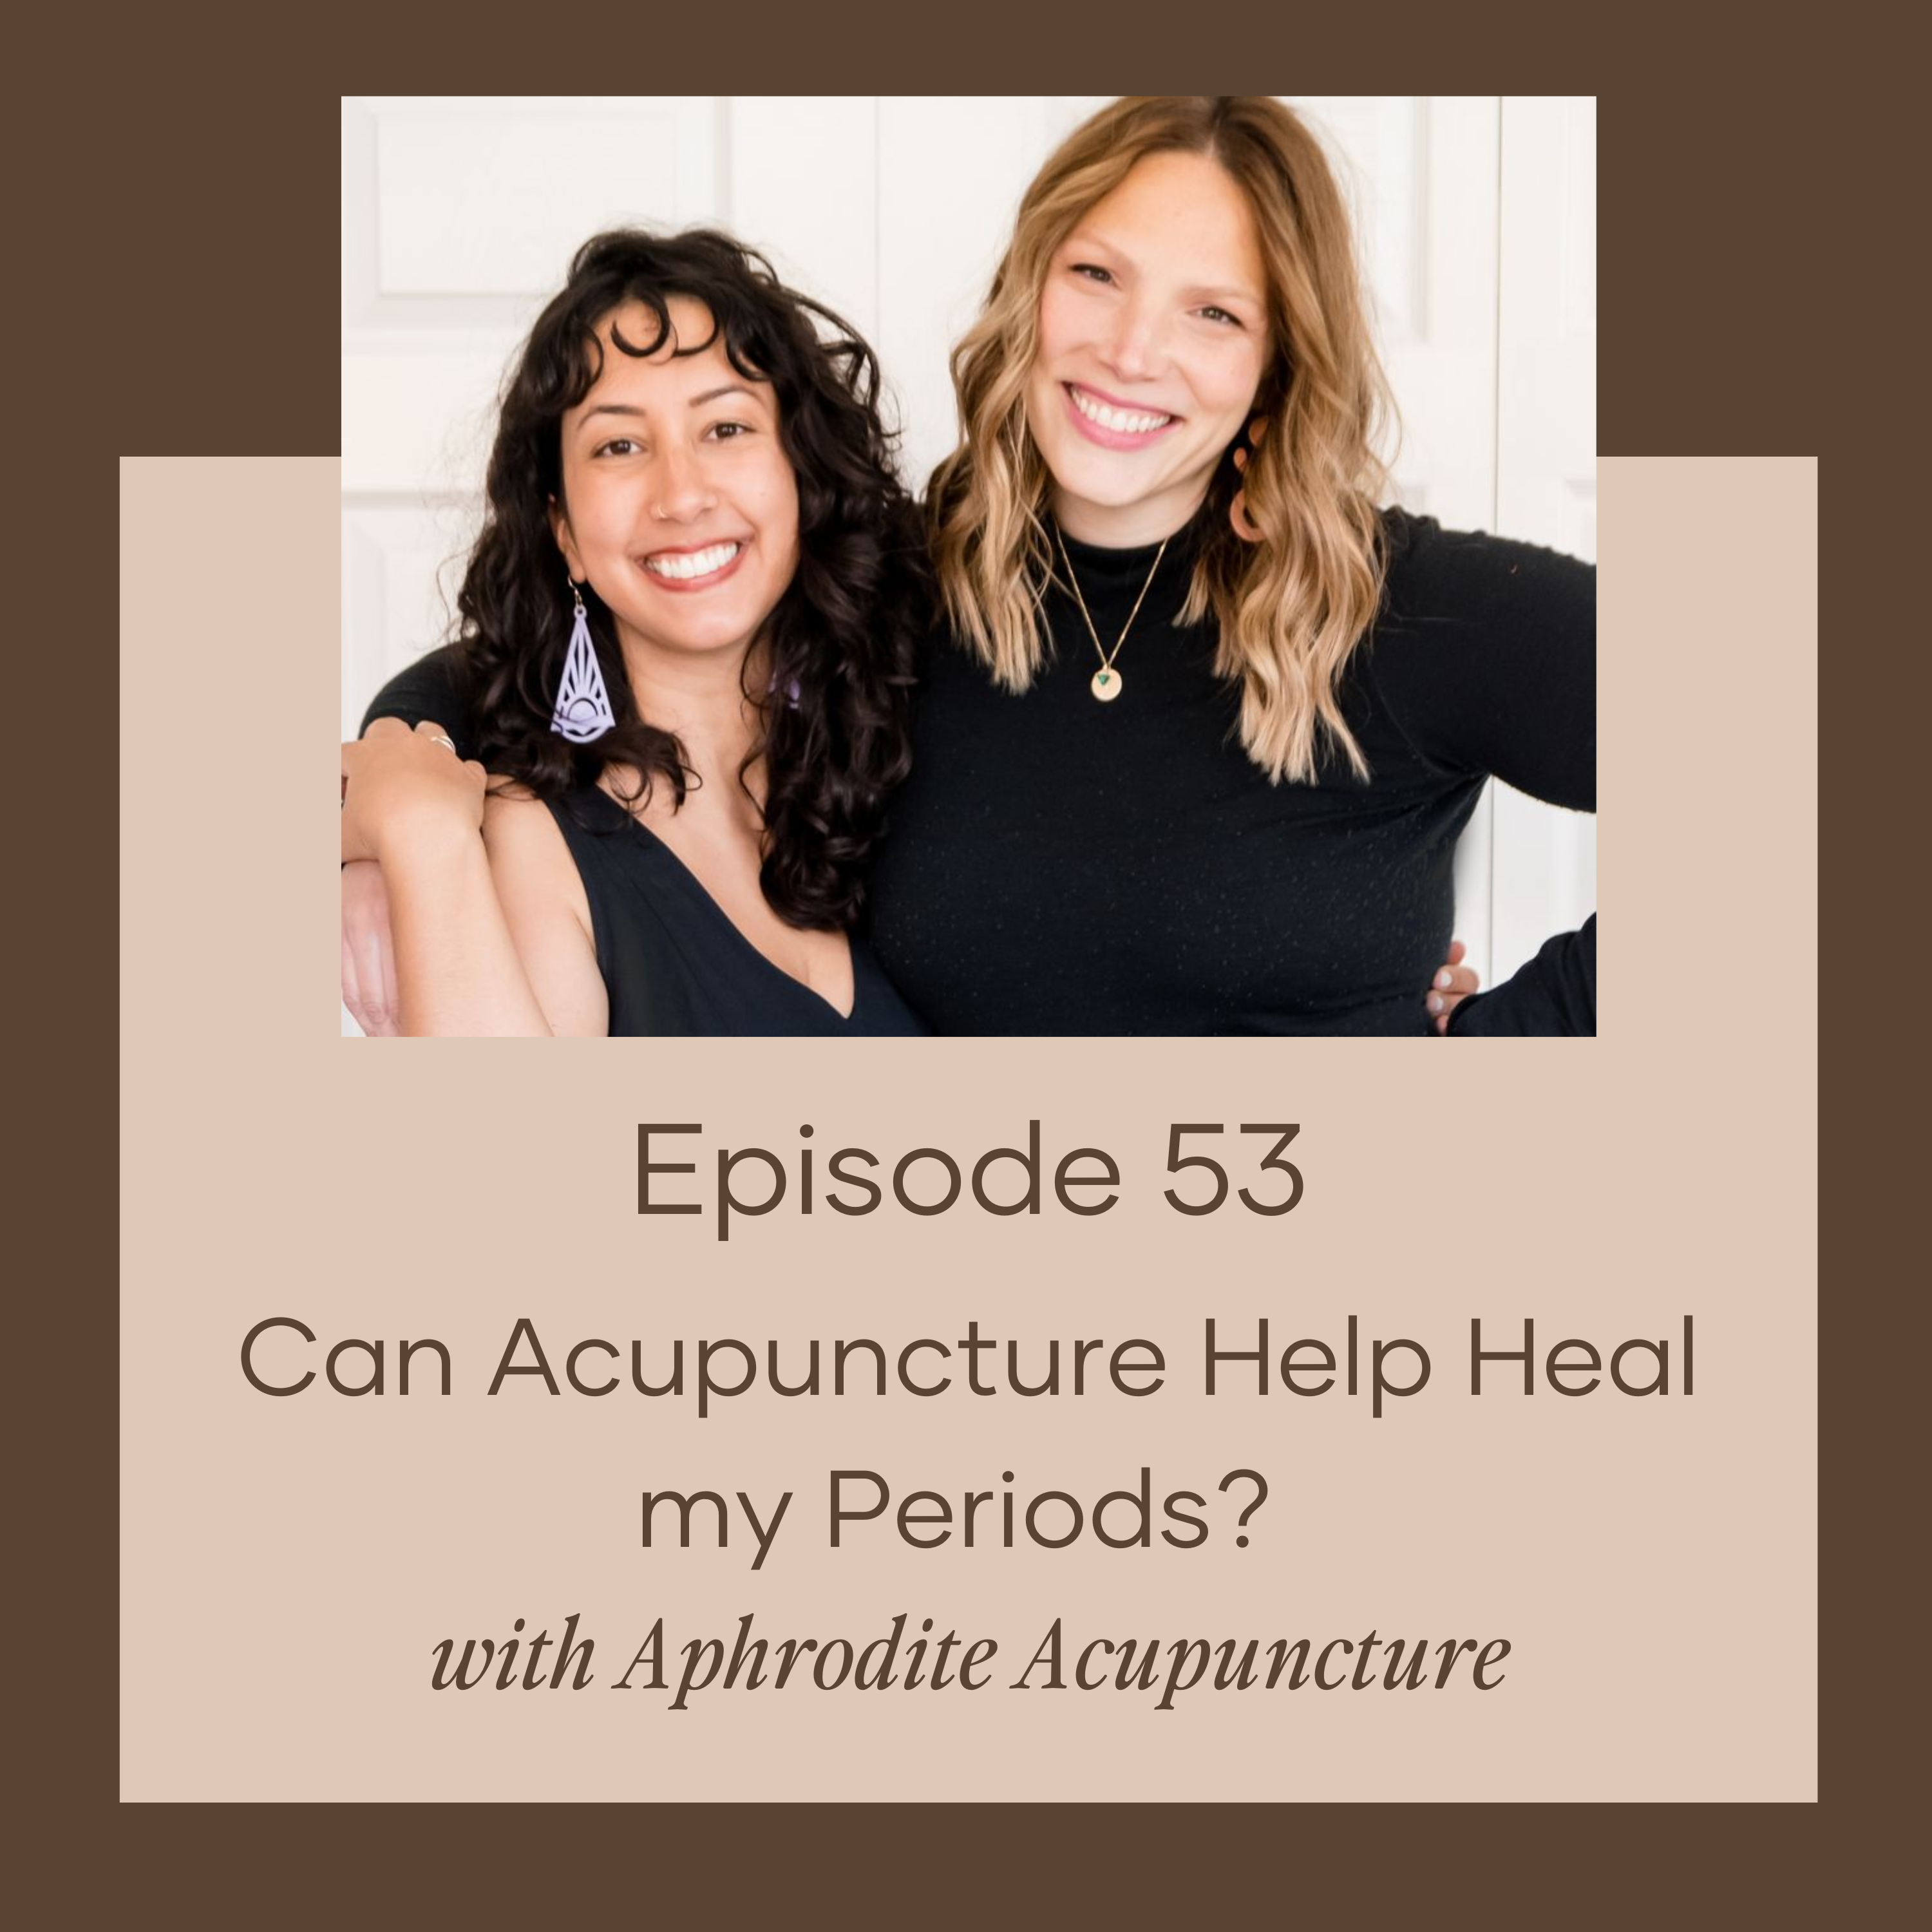 Can Acupuncture Help Heal my Periods? with Aphrodite Acupuncture.